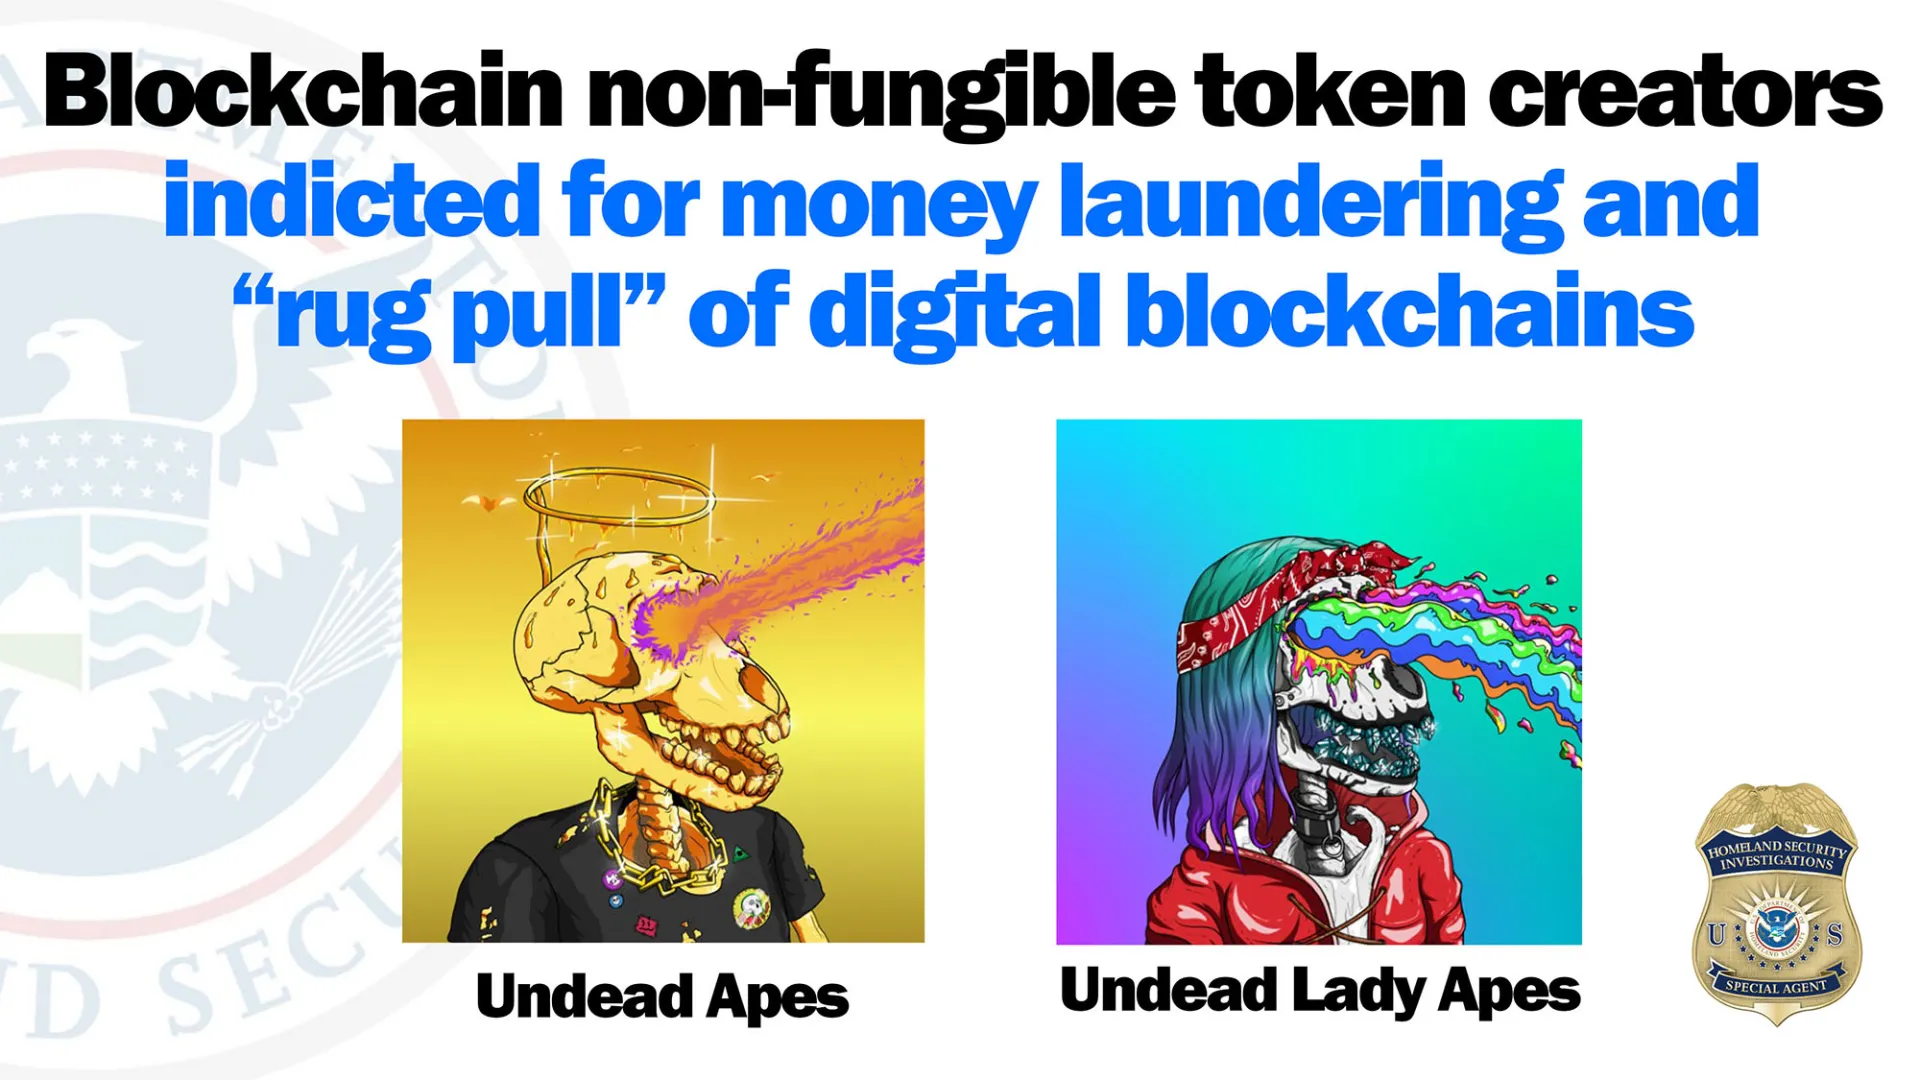 Image of two non-fungible cryptocurrency tokens. 'Undead apes' features a skull dressed in a black gem-encrusted shirt with fire emanating from its eye sockets. 'Undead Lady Apes' features a skull dressed in a hoodie and bandana with liquid emanating from its eyes.